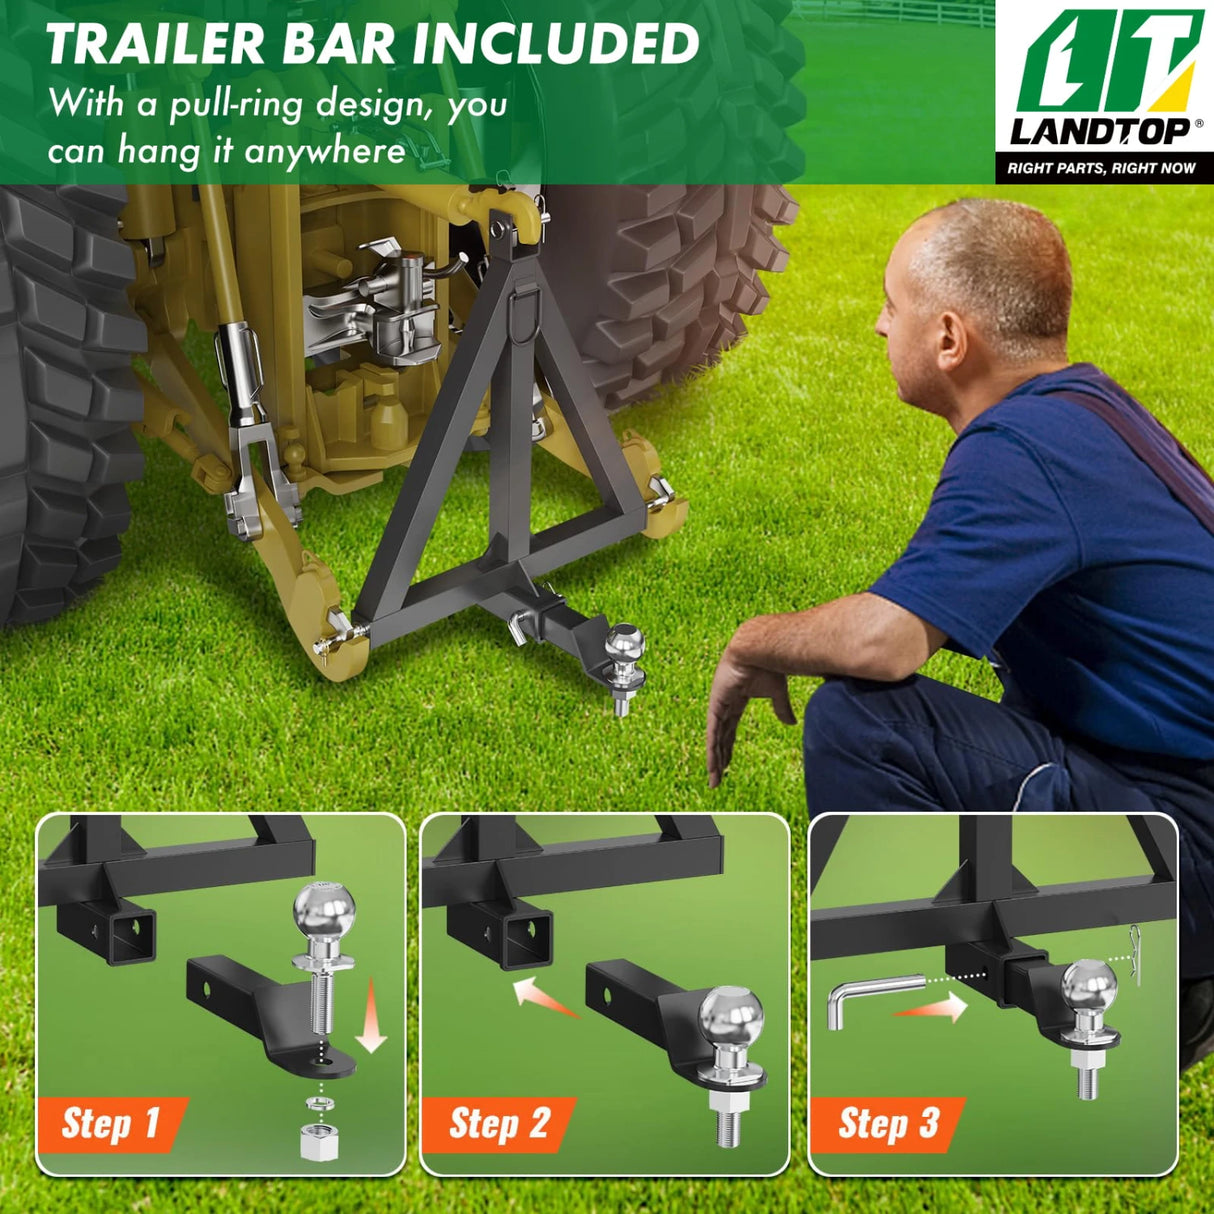 Durable Black 3 Point 2" Receiver Trailer Hitch Heavy Duty Drawbar Adapter Category 1 Tractor